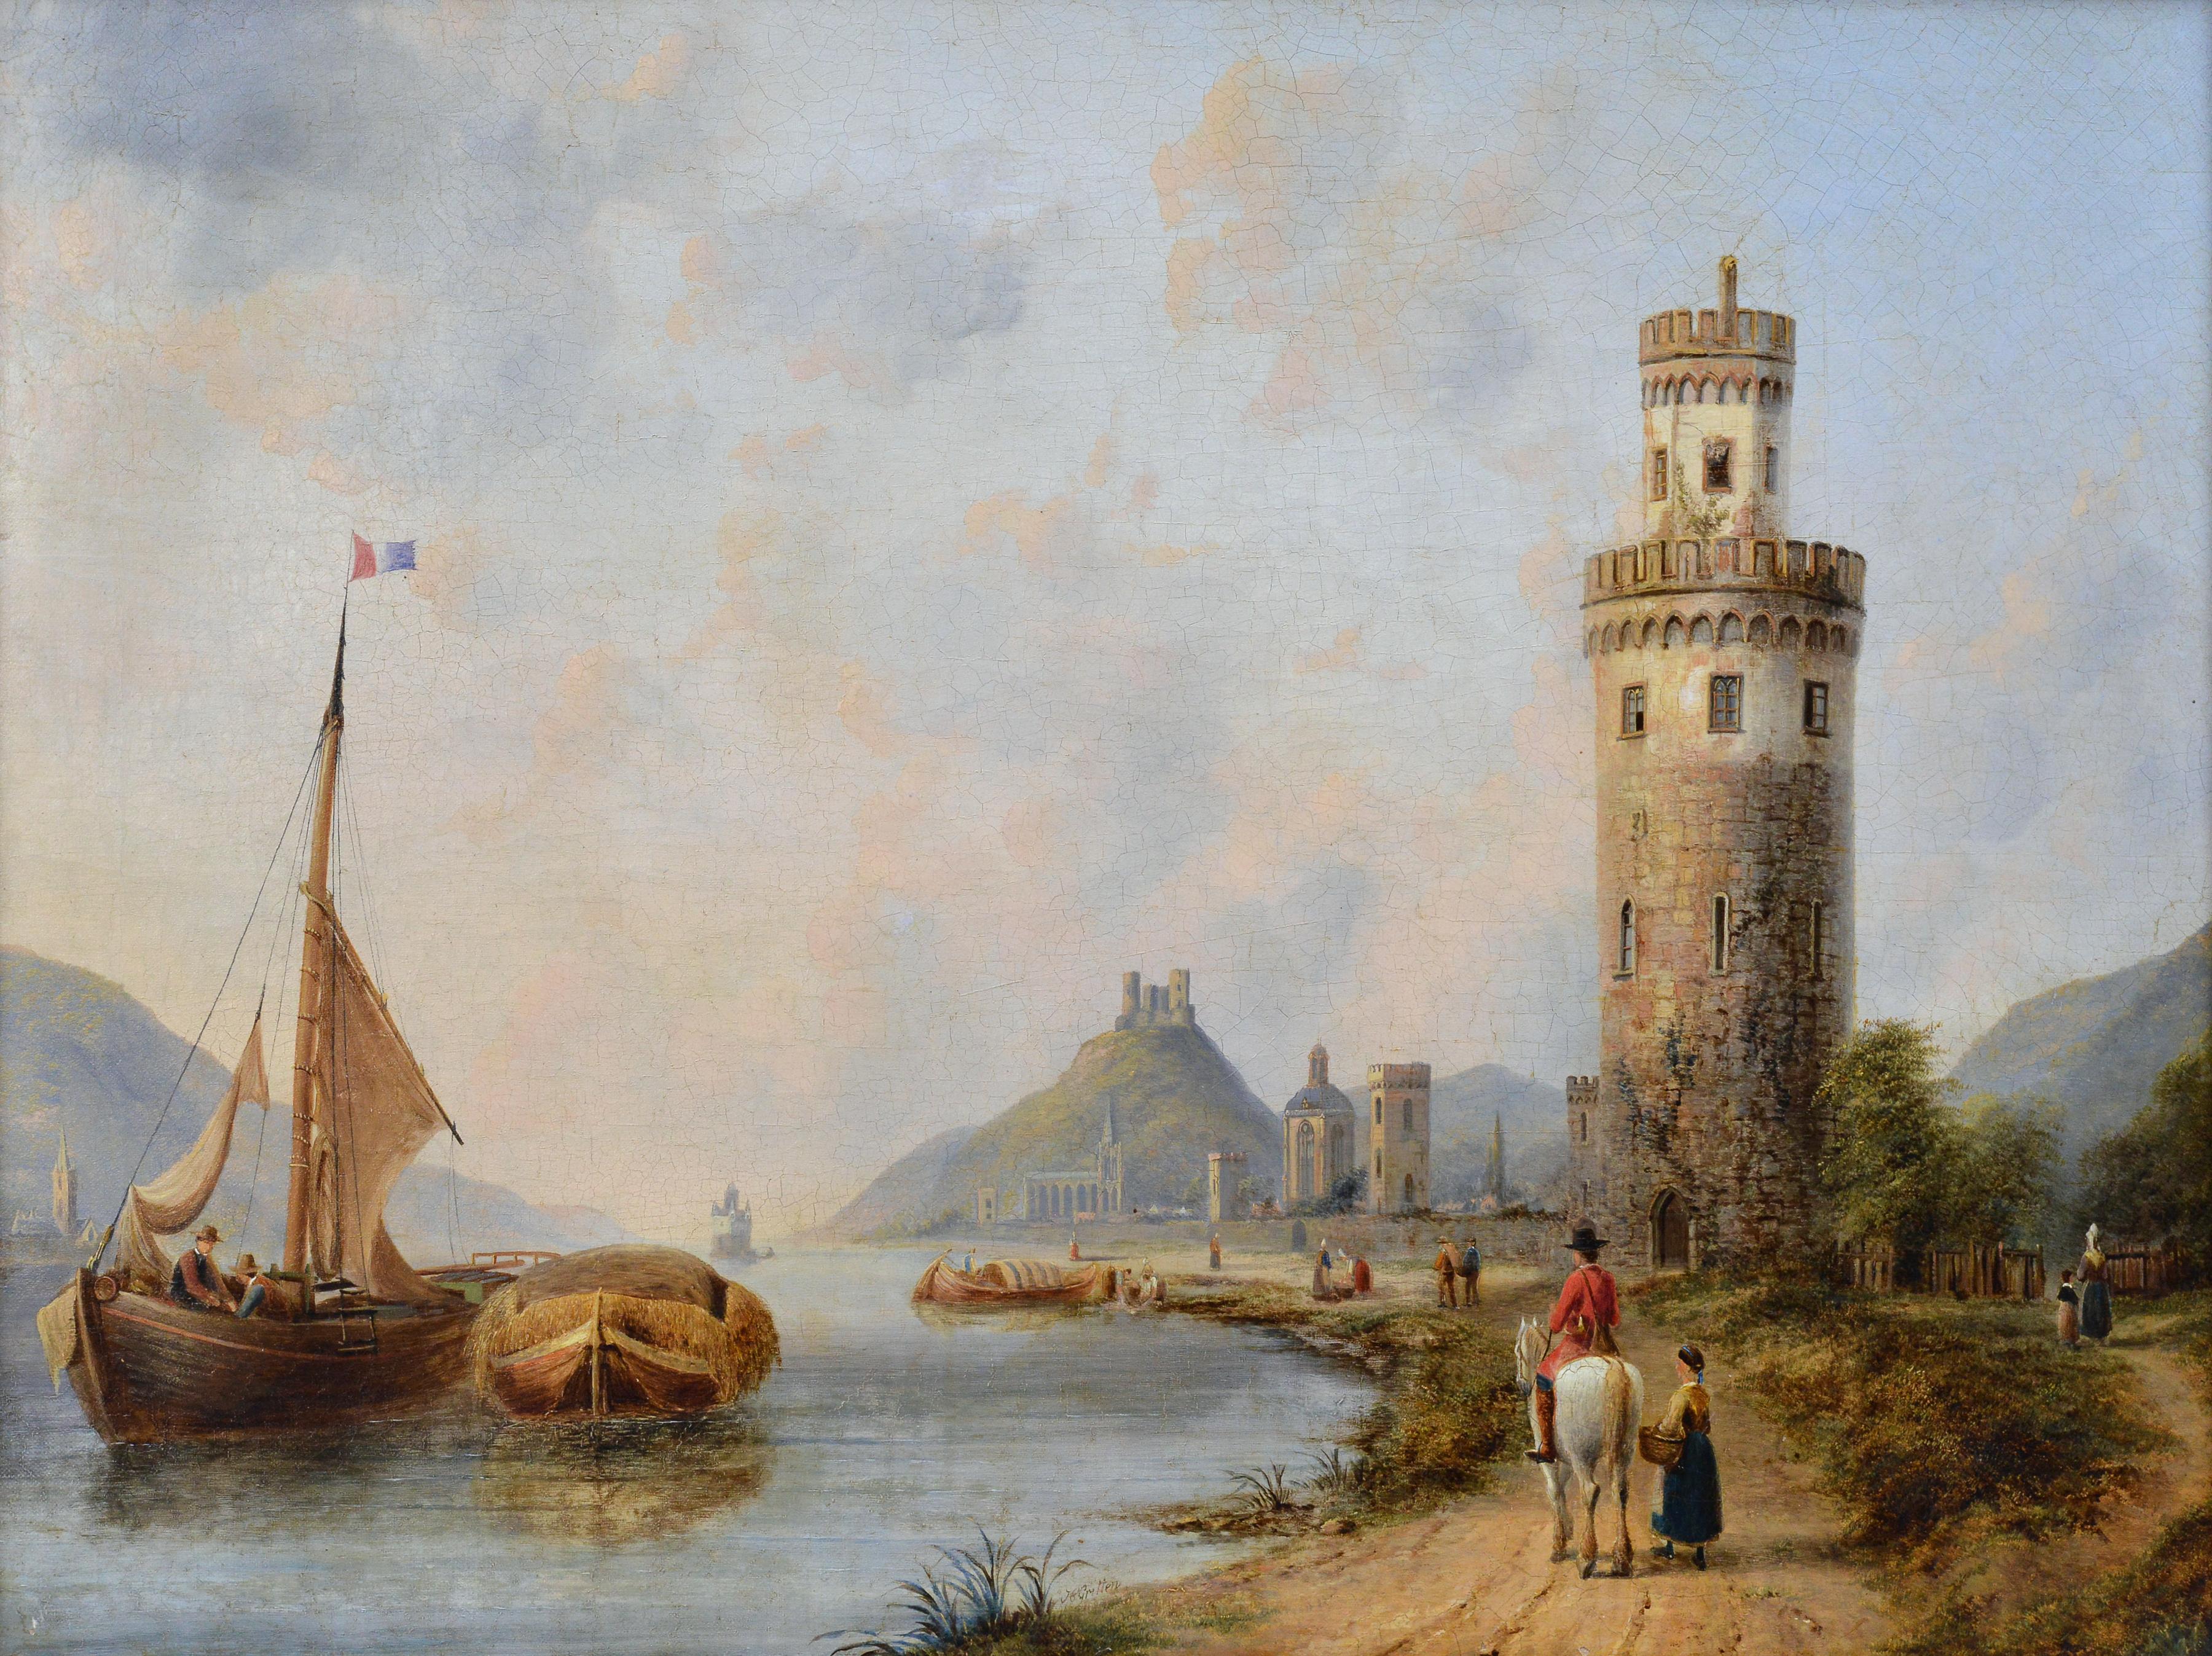 Painting is signed “H. Gritten” in the lower center. Spectacular depiction of one of most picturesque town on the middle Rhein was painted in the mid-19th century by British artist Henry Gritten (1818 –1873) who traversed the world extensively in